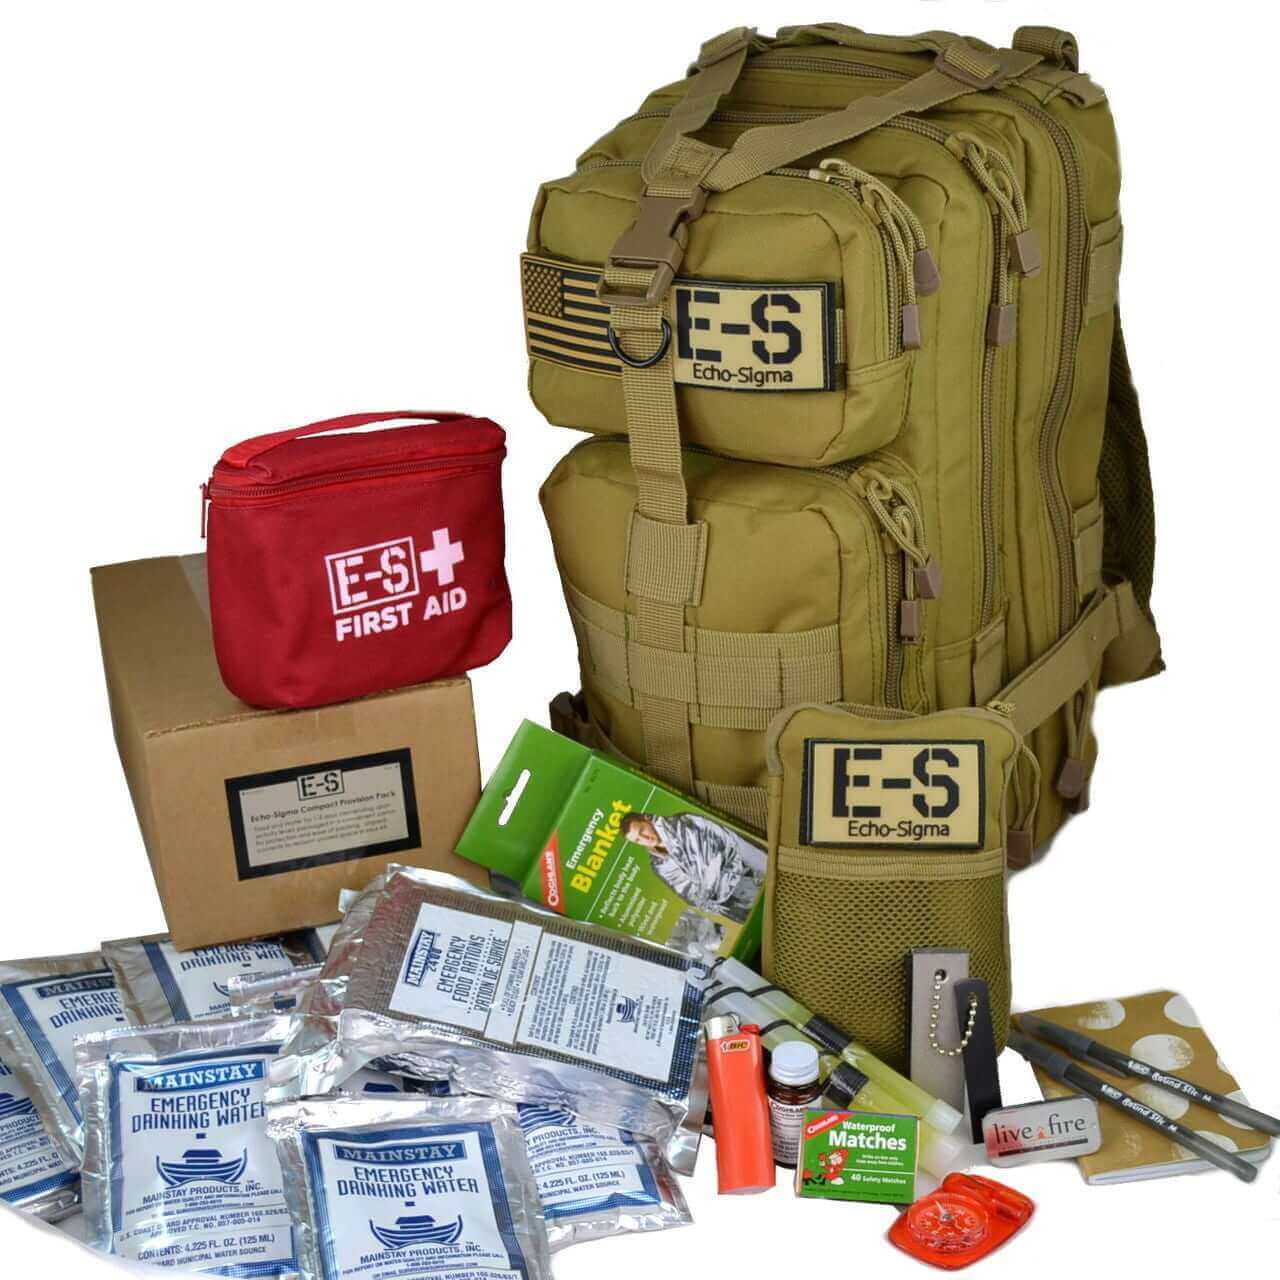 Military Survival Gear - Camping Safety & Survival Equipment & 1st Aid Kit